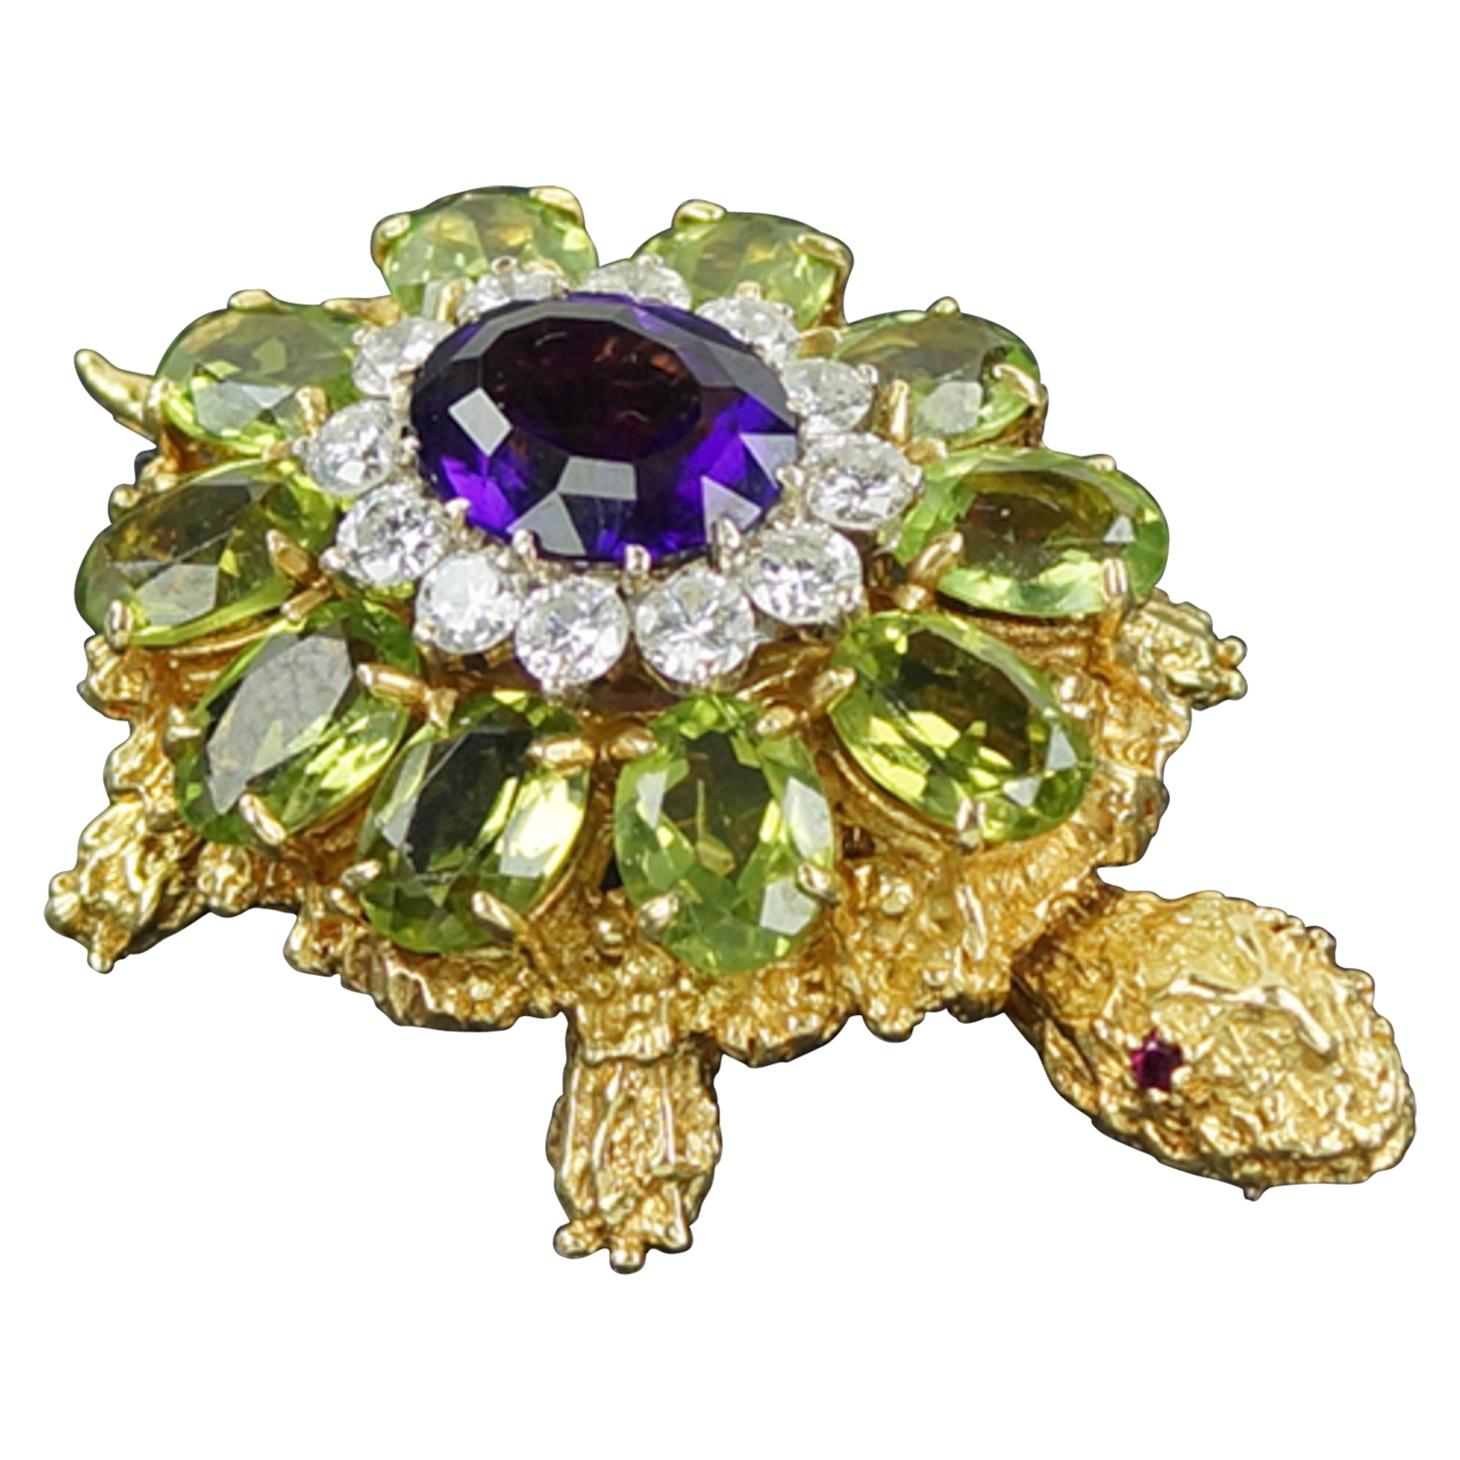 18 Karat Yellow Gold, Amethyst, Diamond, Peridot Pin The The Style Of Rosenthal. For Sale